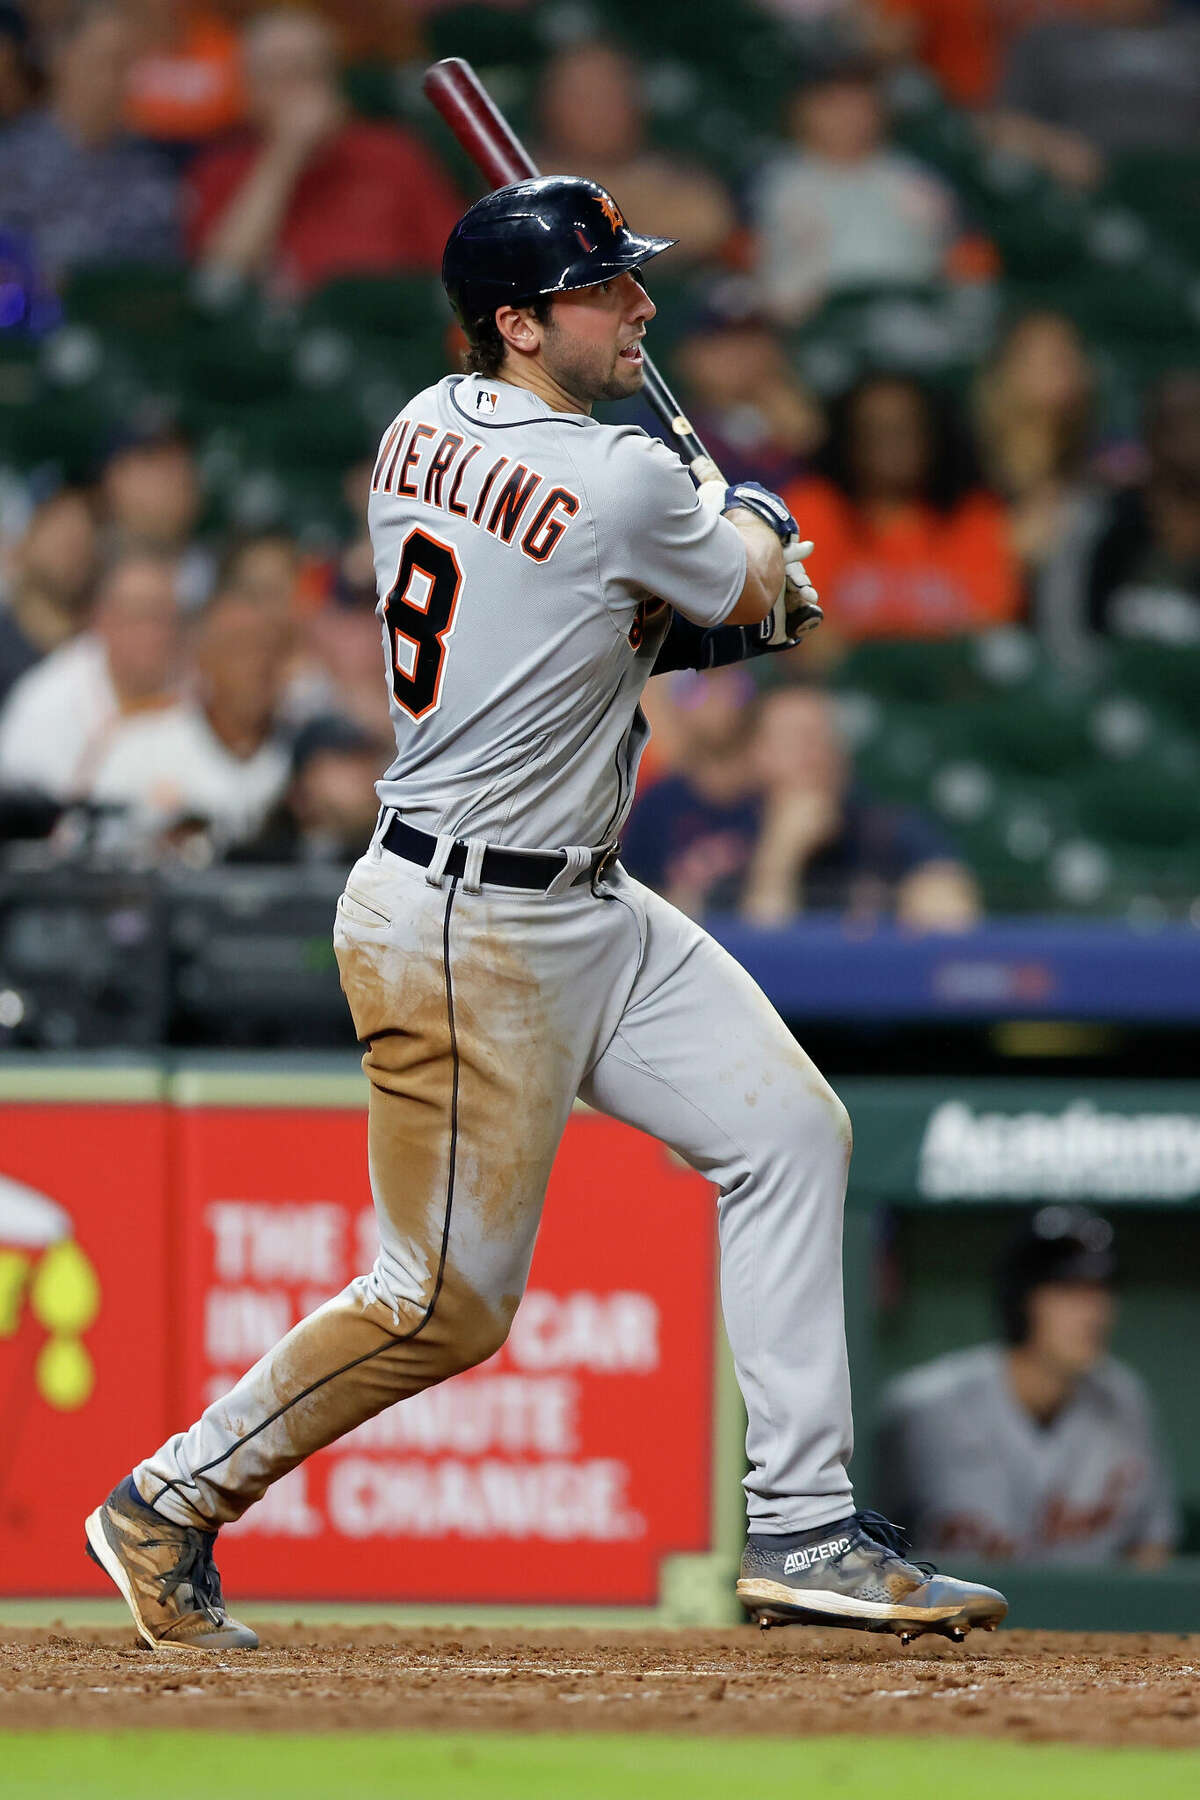 Houston Astros come up short to Detroit Tigers after 11 innings